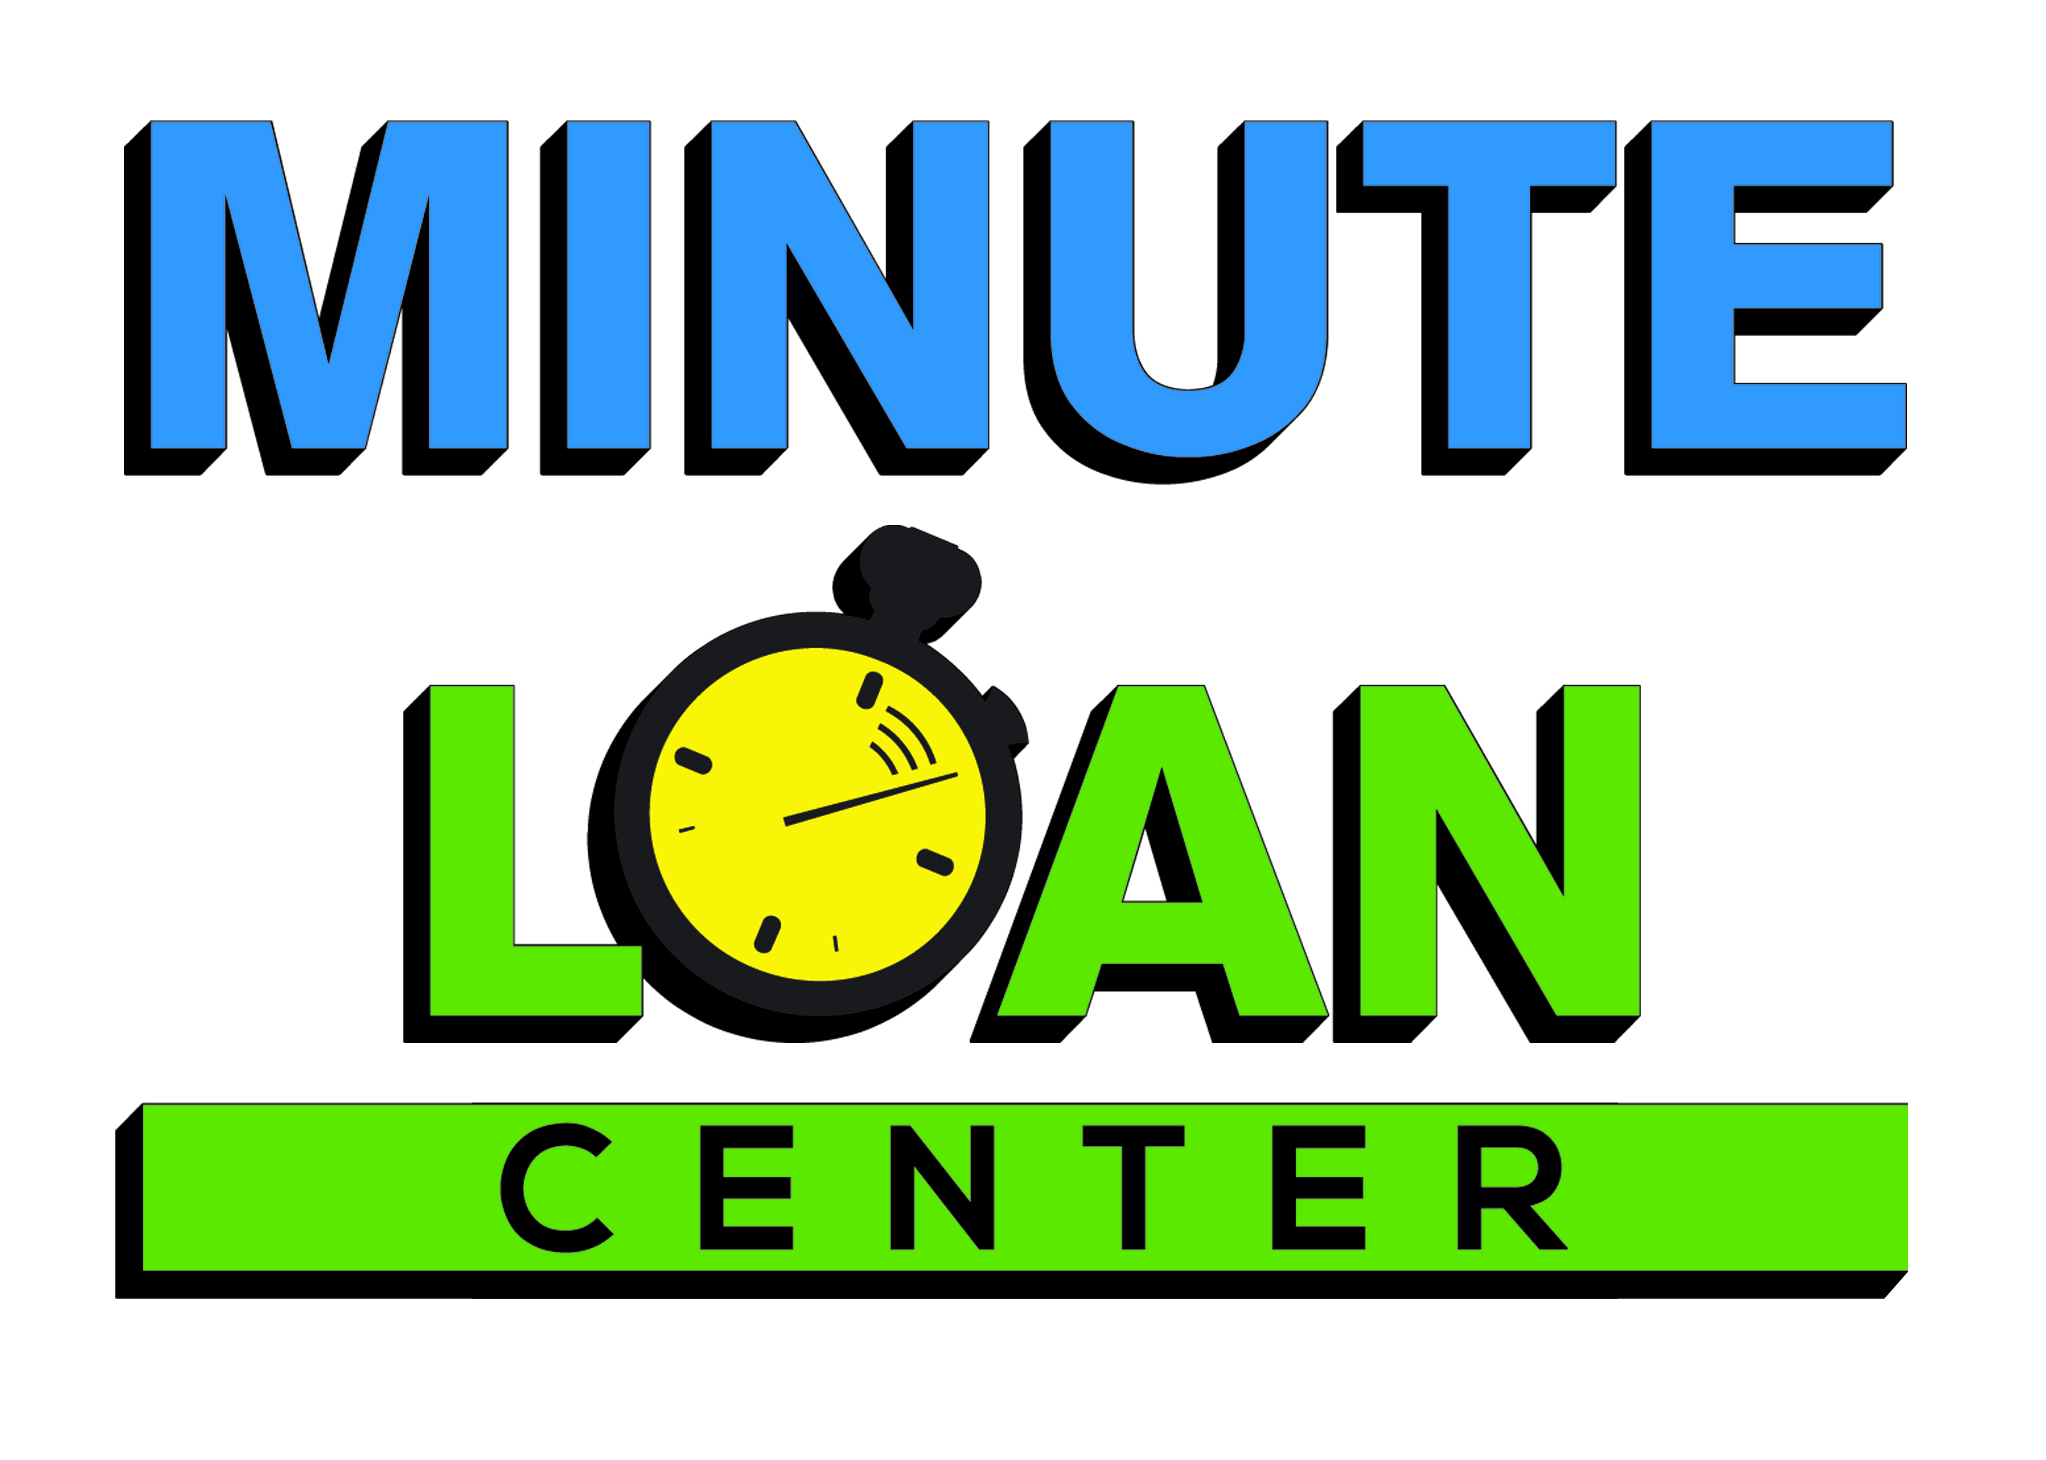 Image One – Minute Loan Center Logo
Minute Loan Center is a pioneering alternative finance company helping people in a pinch get short-term funds, perfect credit not required.  MLC is a community lender with decades of experience serving our neighbors. We lead the way with products designed around customer success and additional services such as MLC Coupons and First Avenu.
#MinuteLoan #MLC #SouthCarolina
